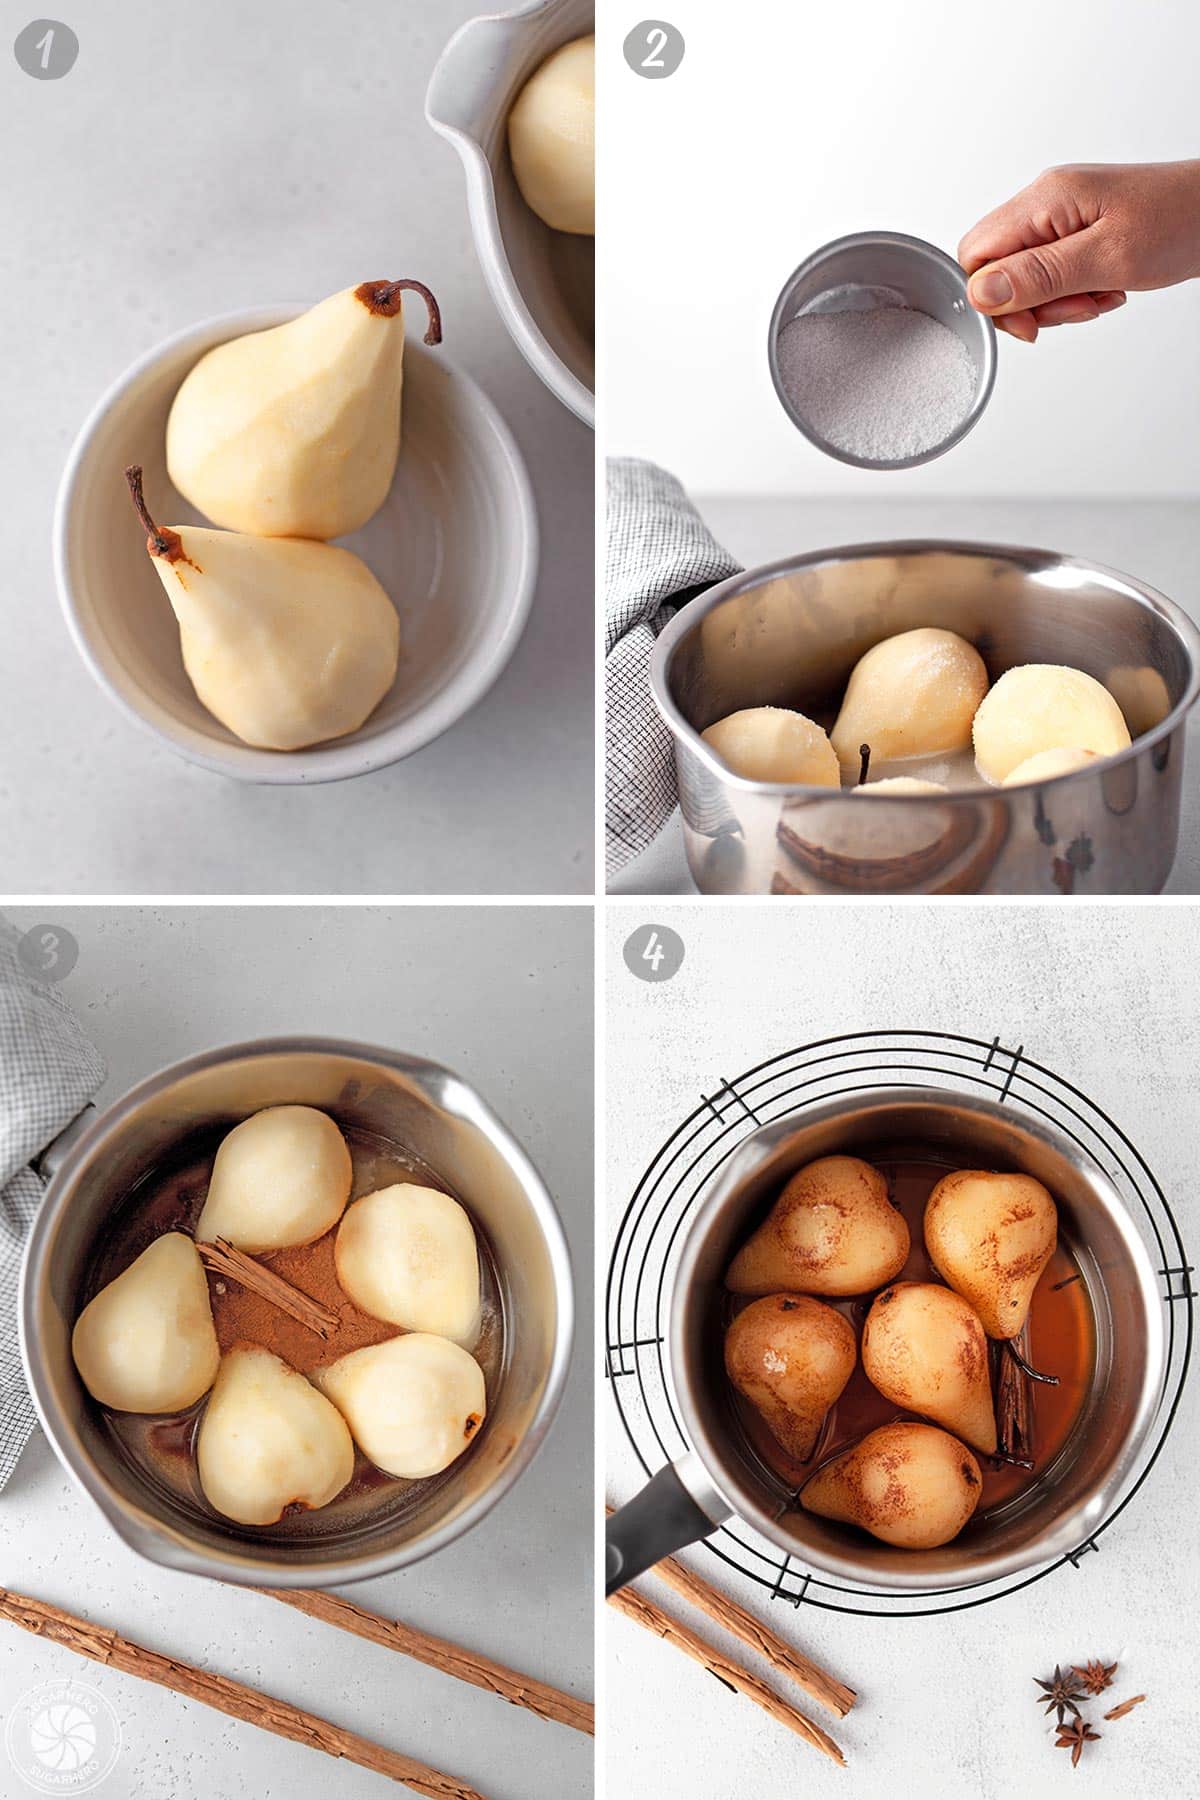 4 photo collage of how to make Poached Pears including peeling and cooking them.